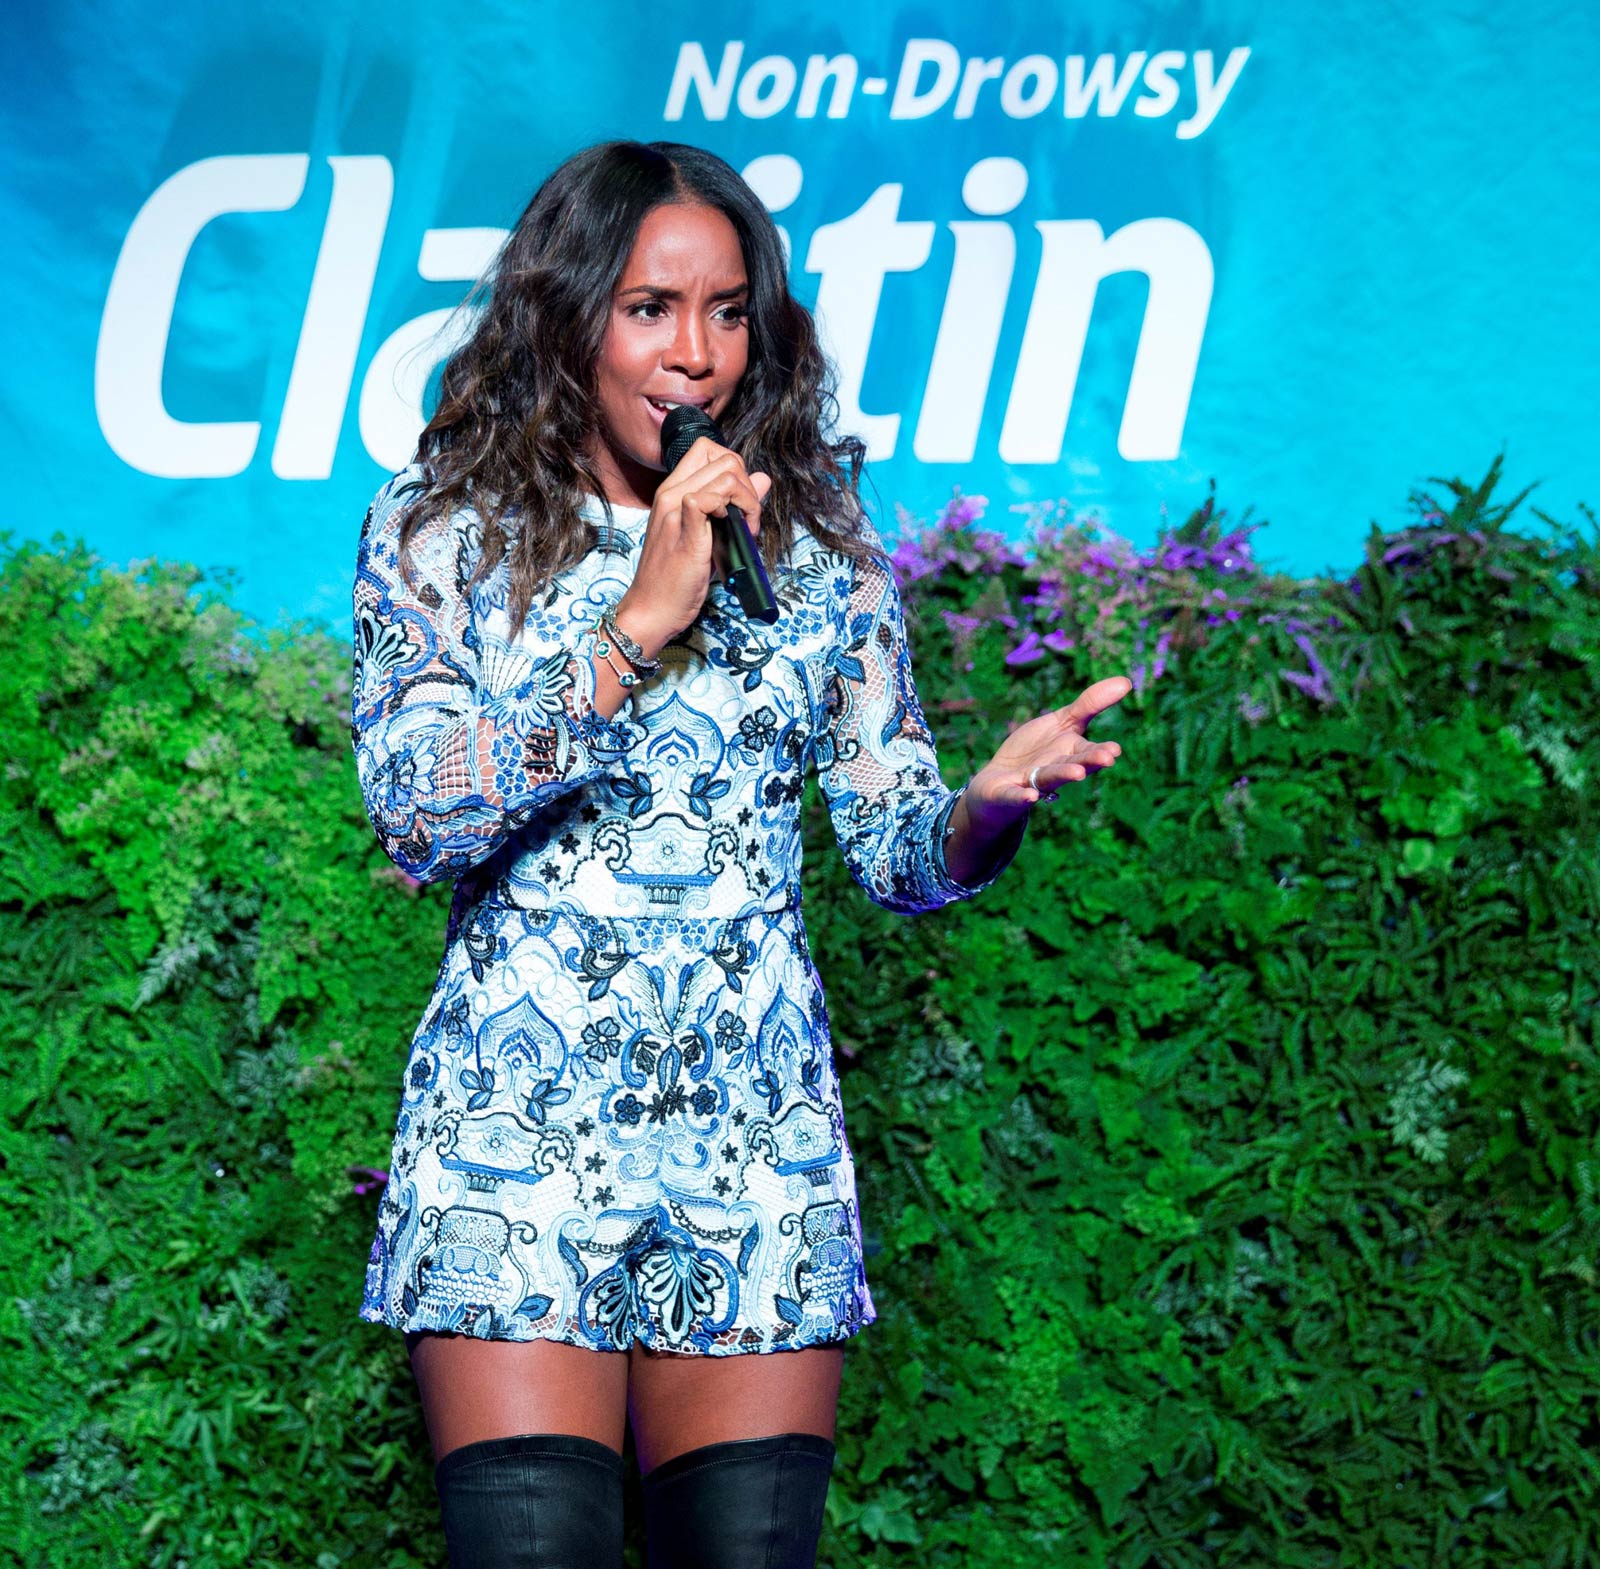 Kelly Rowland performs at the Claritin kick off spring event